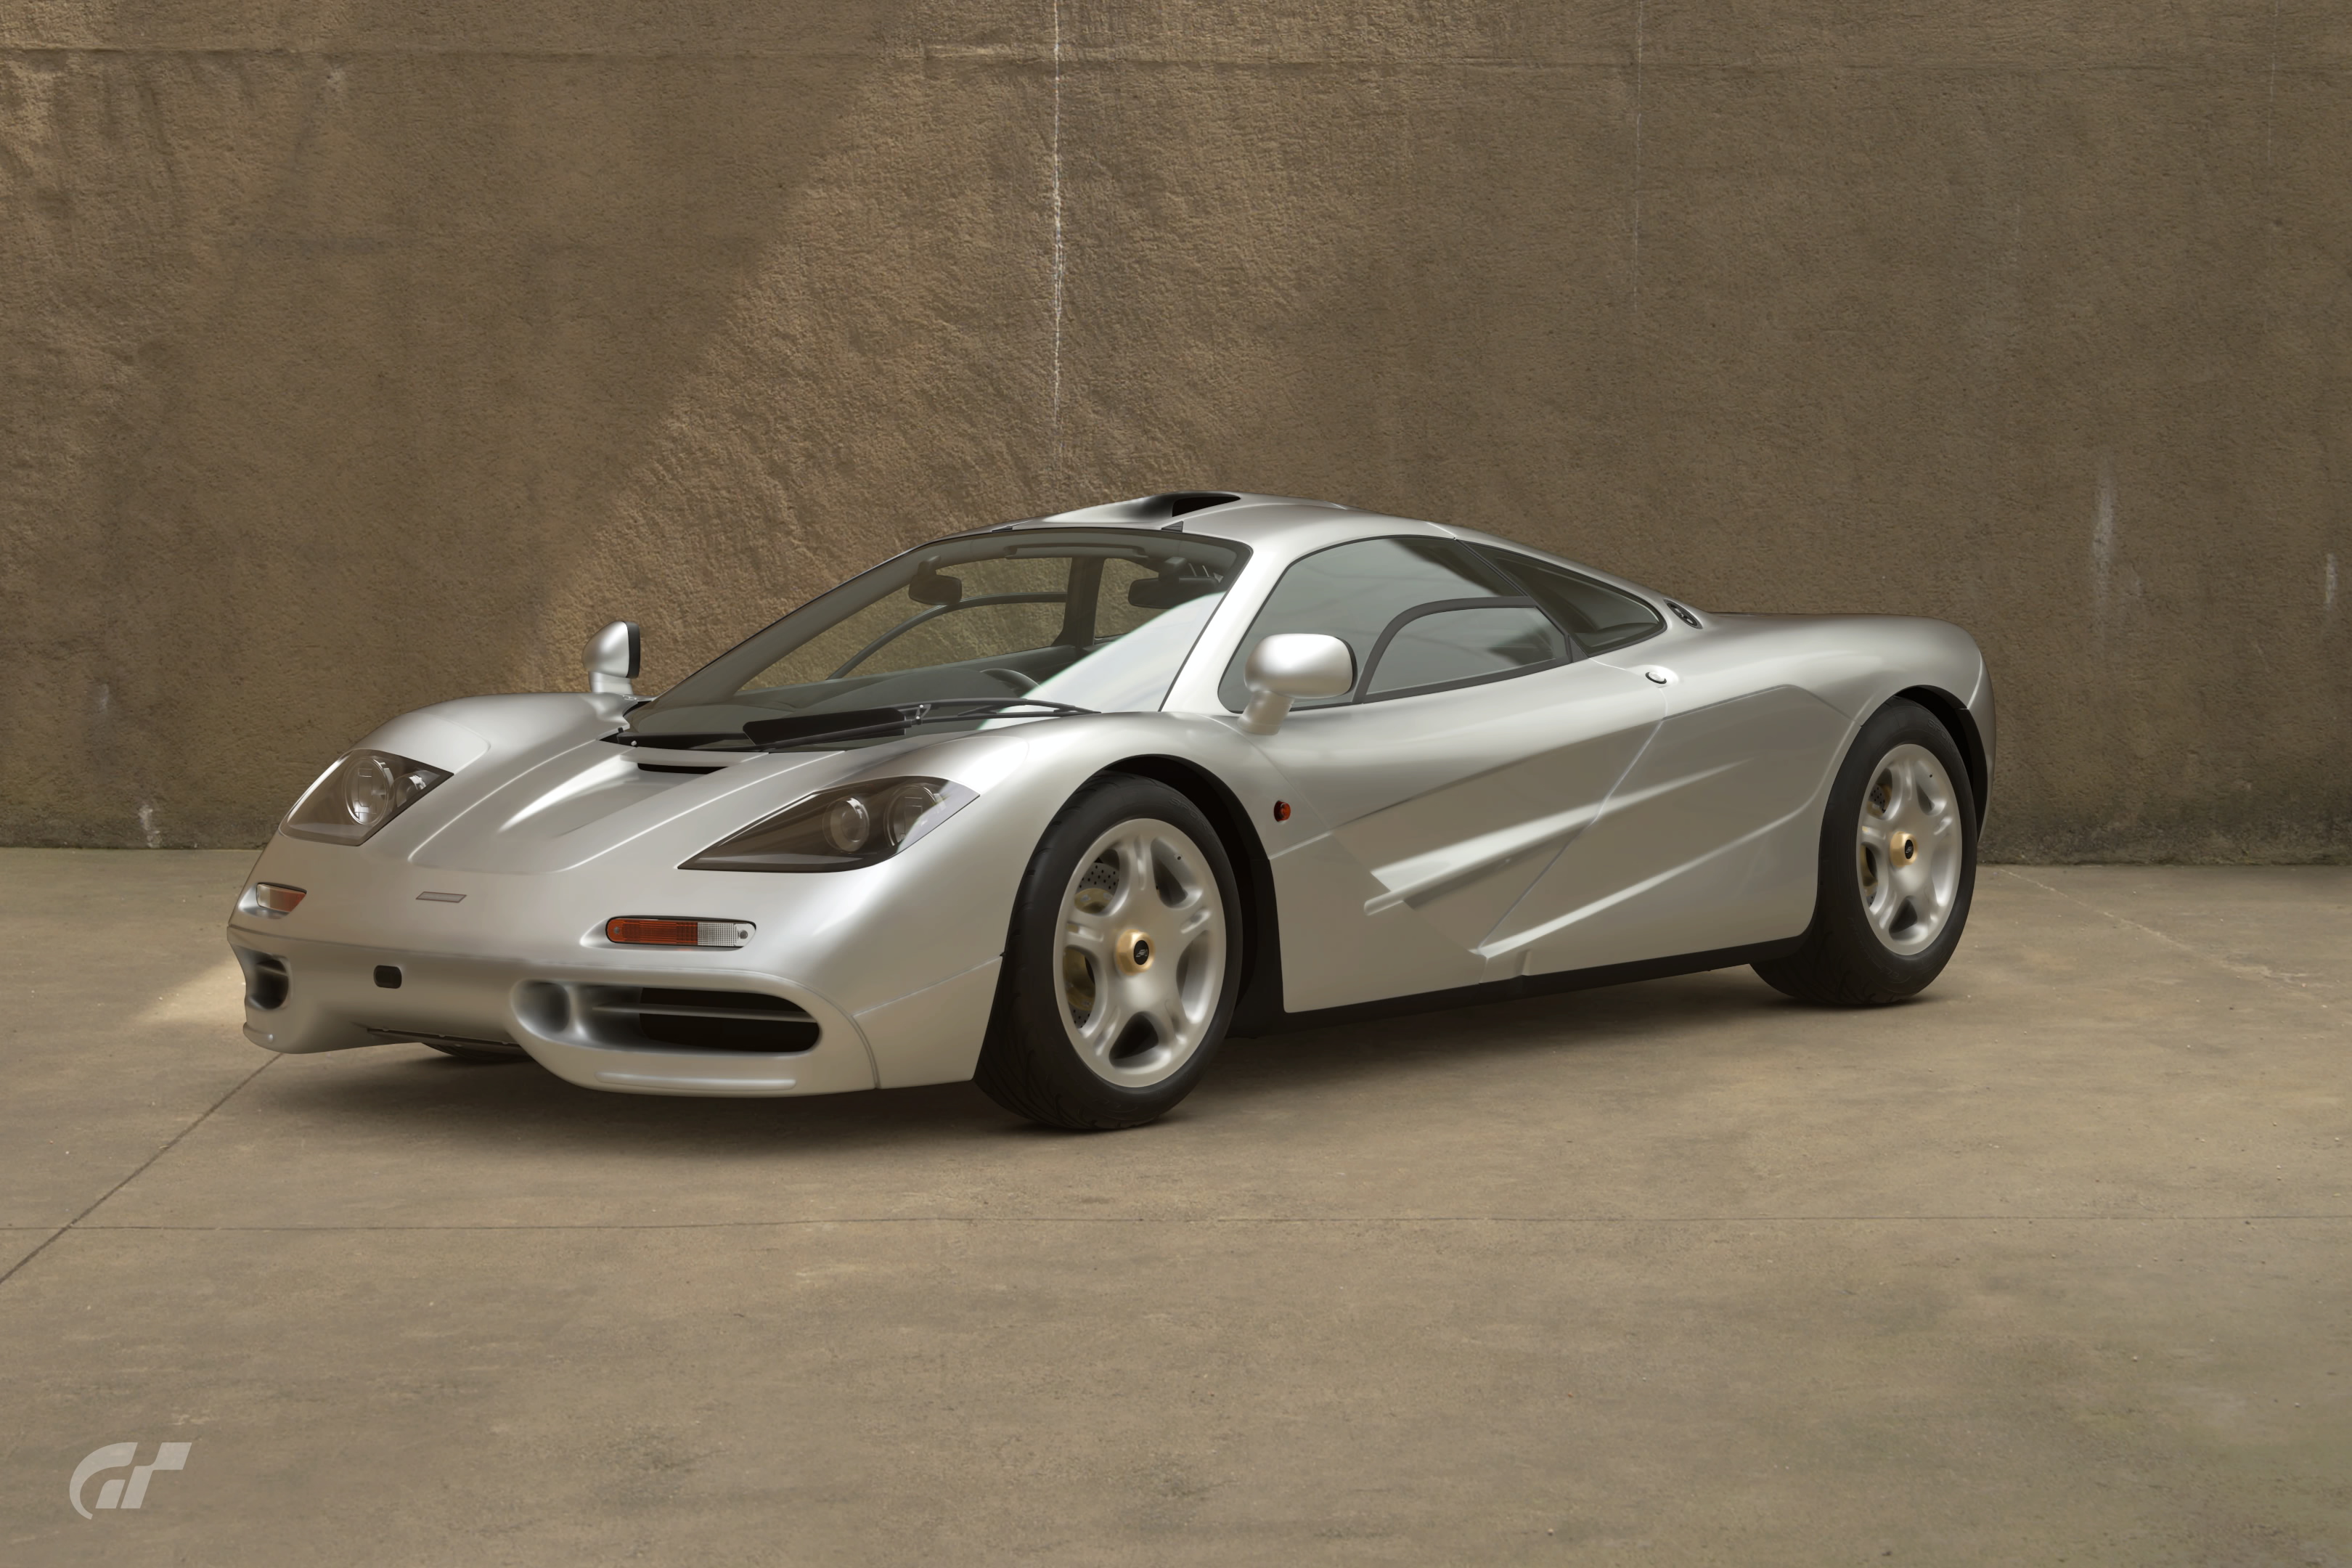 This Is What $150 Million Worth Of McLaren F1s Look Like